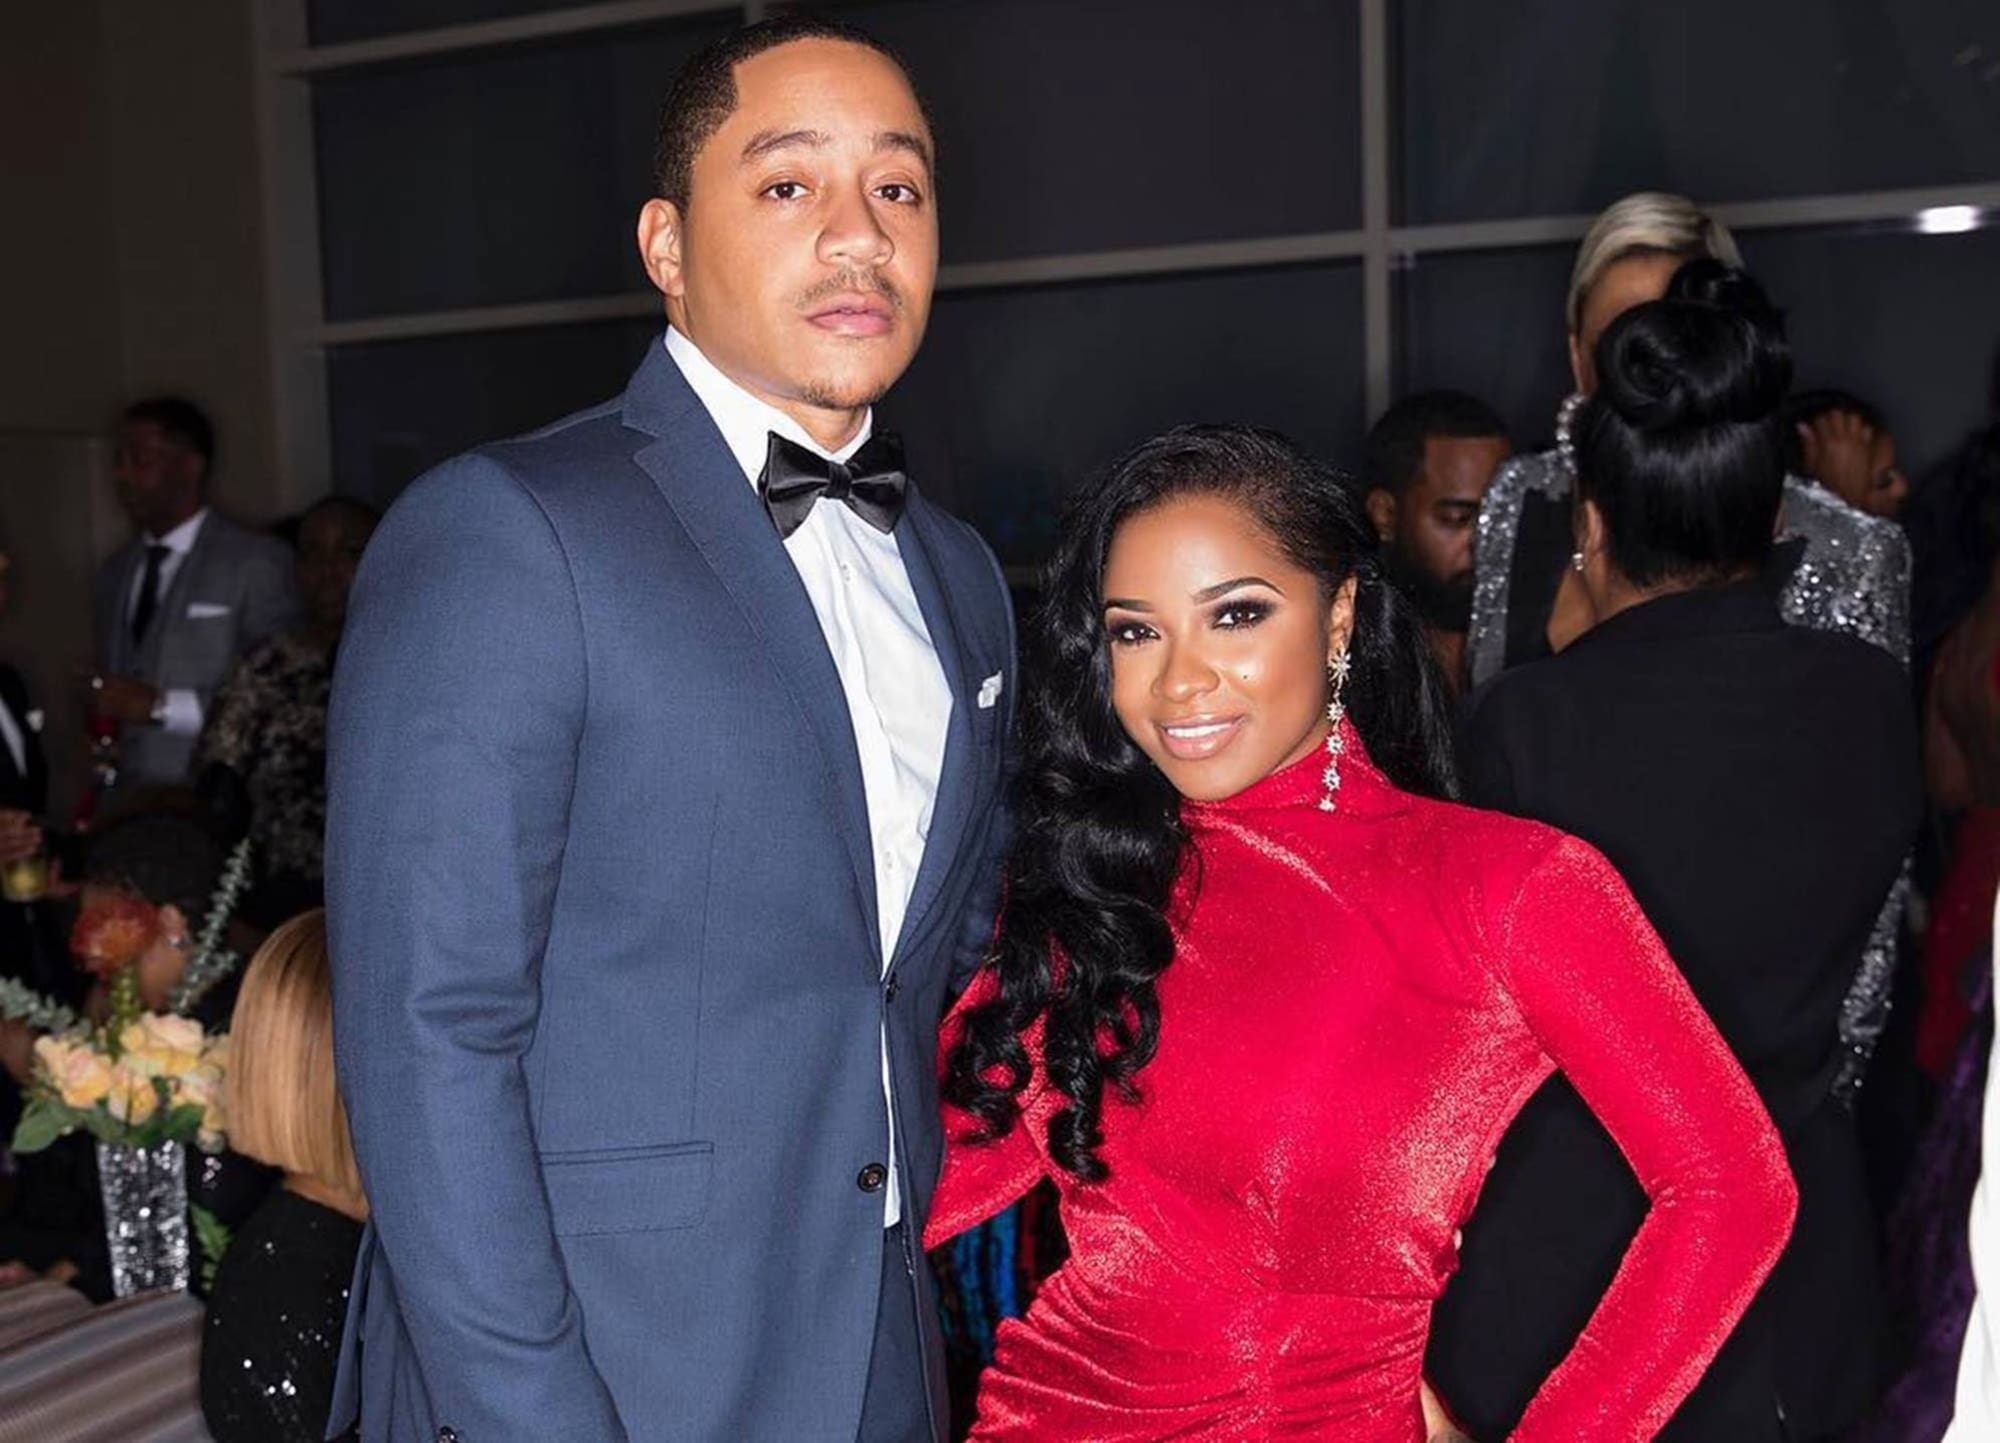 Toya Johnson Made Fans Crazy With Excitement When She Told Them They'll Get To See How Robert Rushing Proposed!